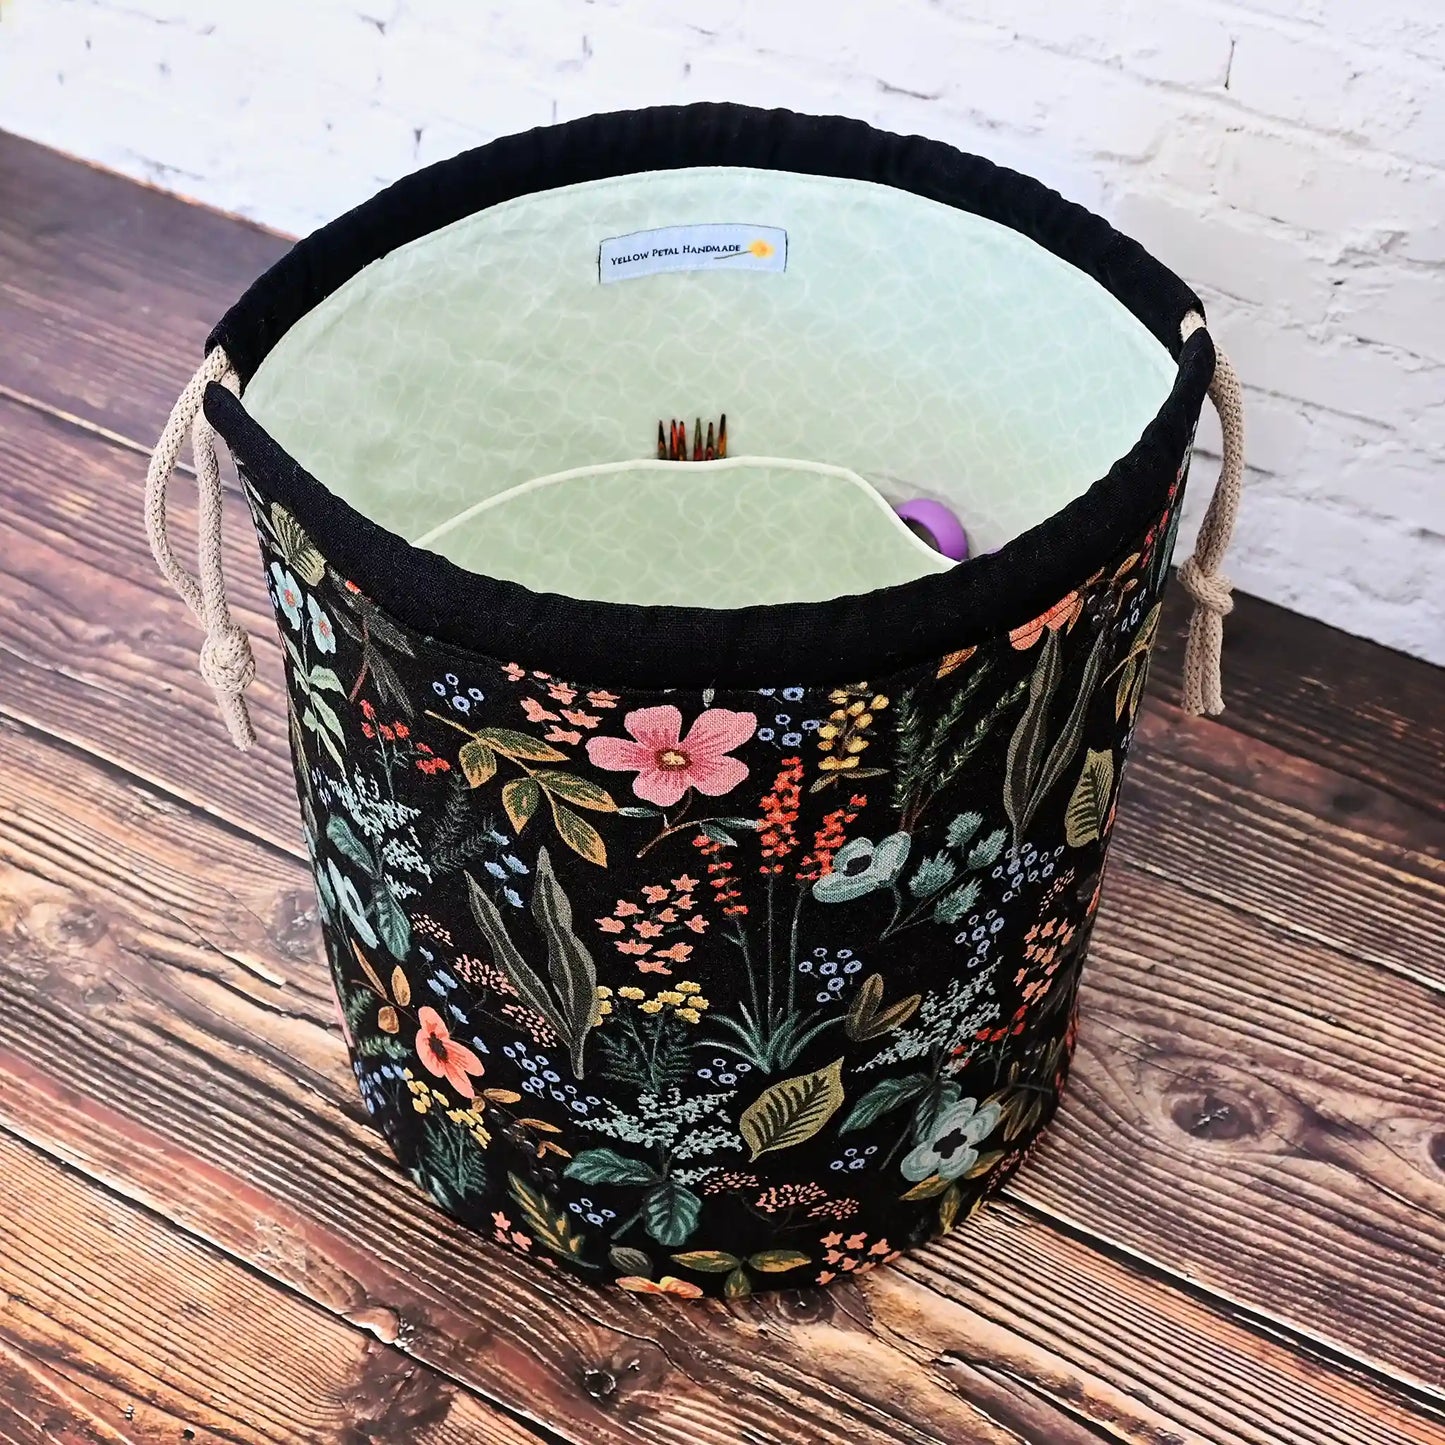 Black floral bucket style project bag with lots of pockets.  Made from Rifle Paper Co's Amalfi canvas, this drawstring bag features a quilted base for design and stability.  Handmade in Canada by Yellow Petal Handmade.